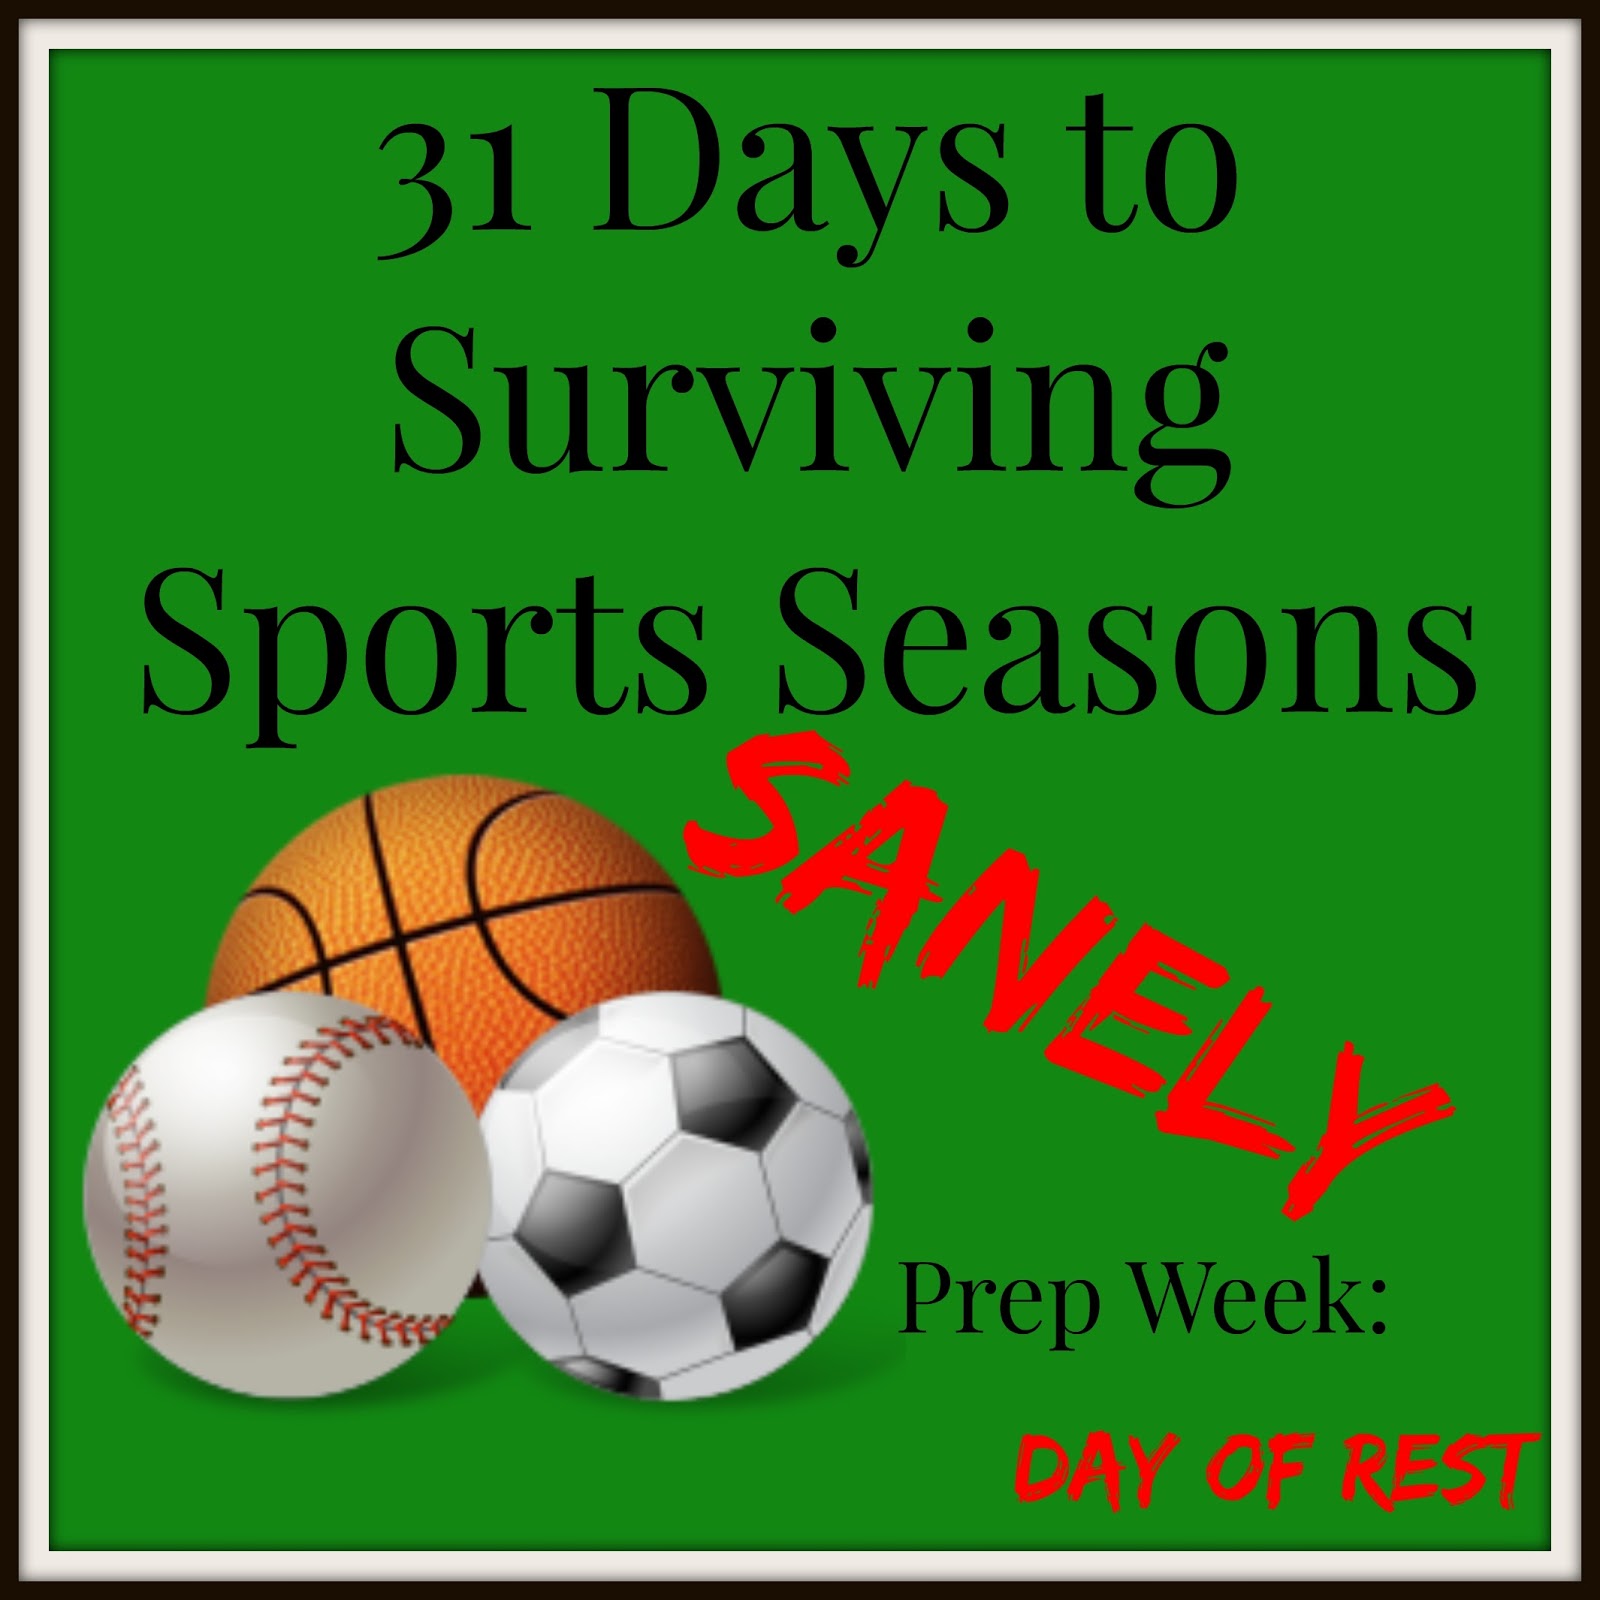 31 Days to Surviving Sports Seasons Sanely: Day of Rest